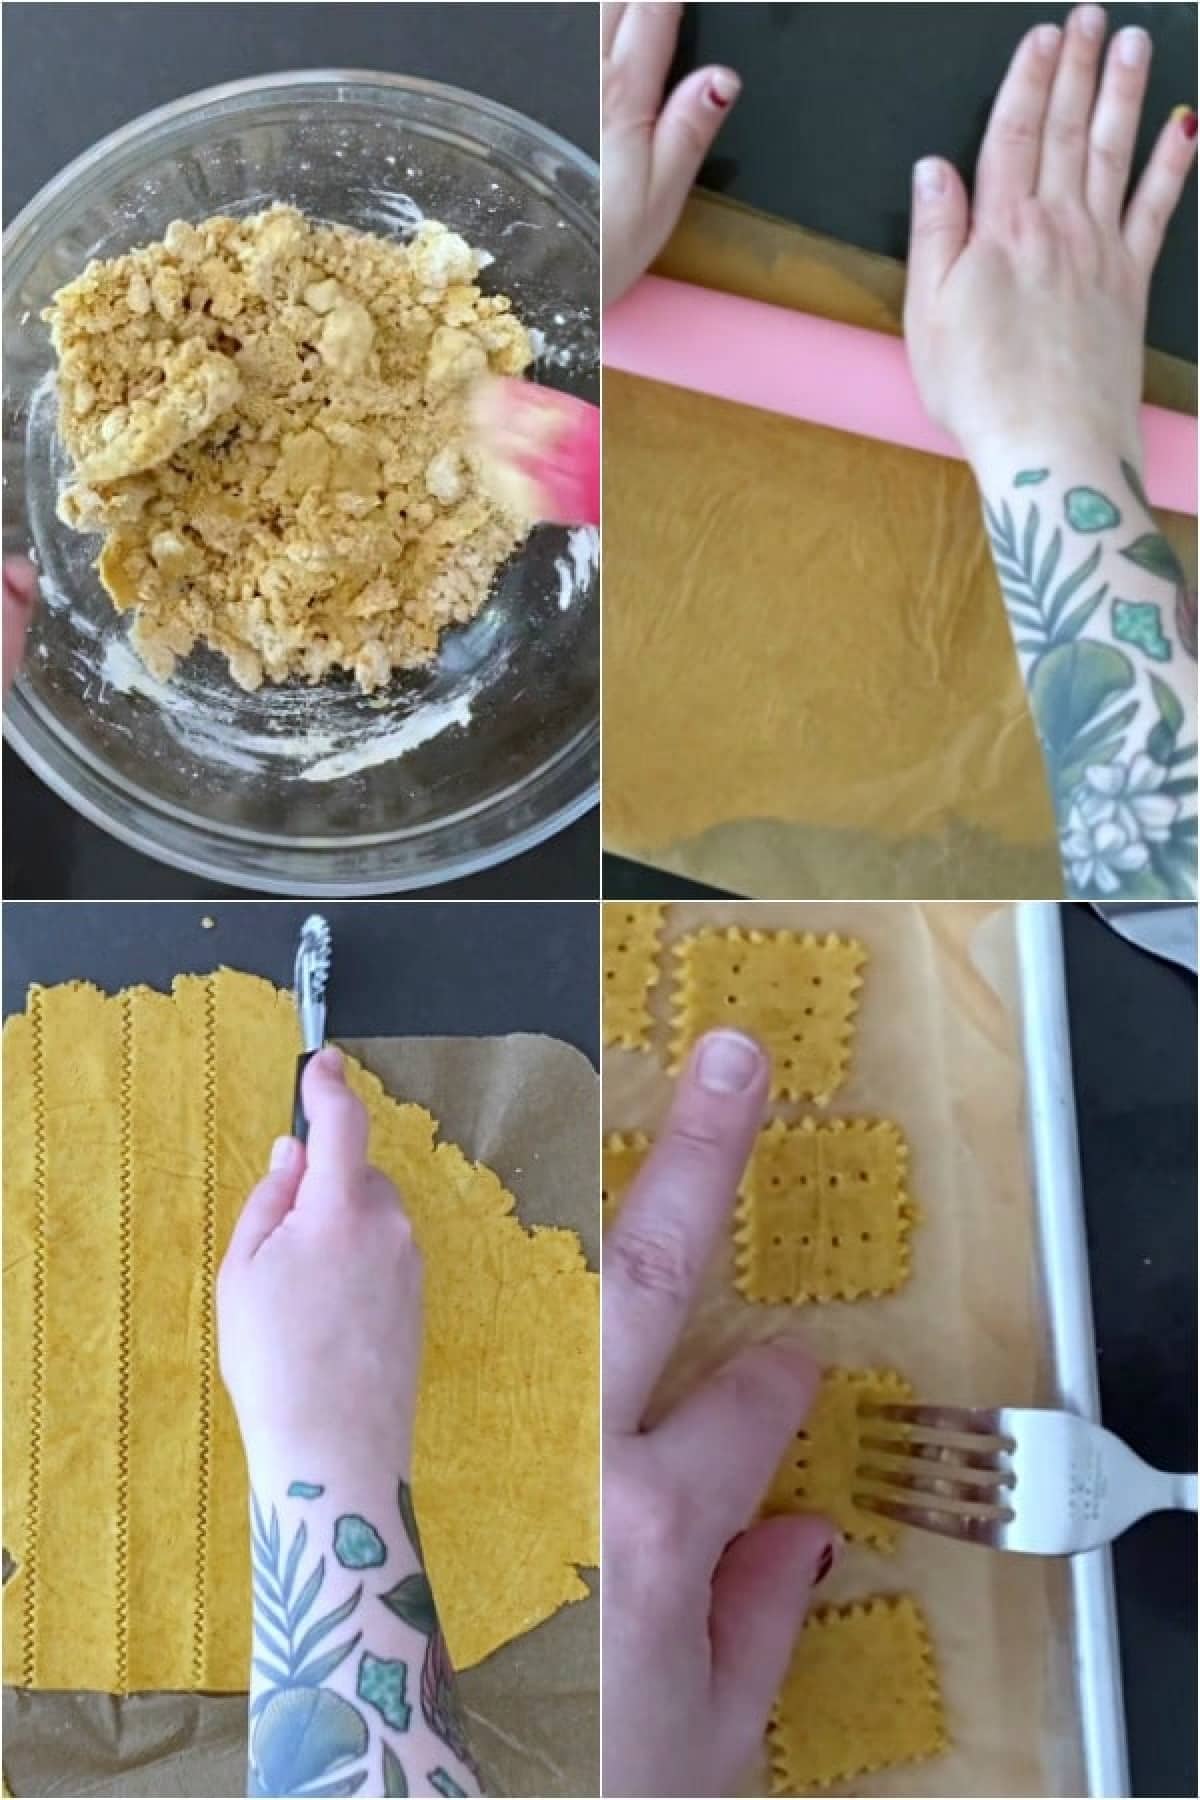 A four photo collage showing how to make vegan cheese its: stir, roll, cut, and bake.